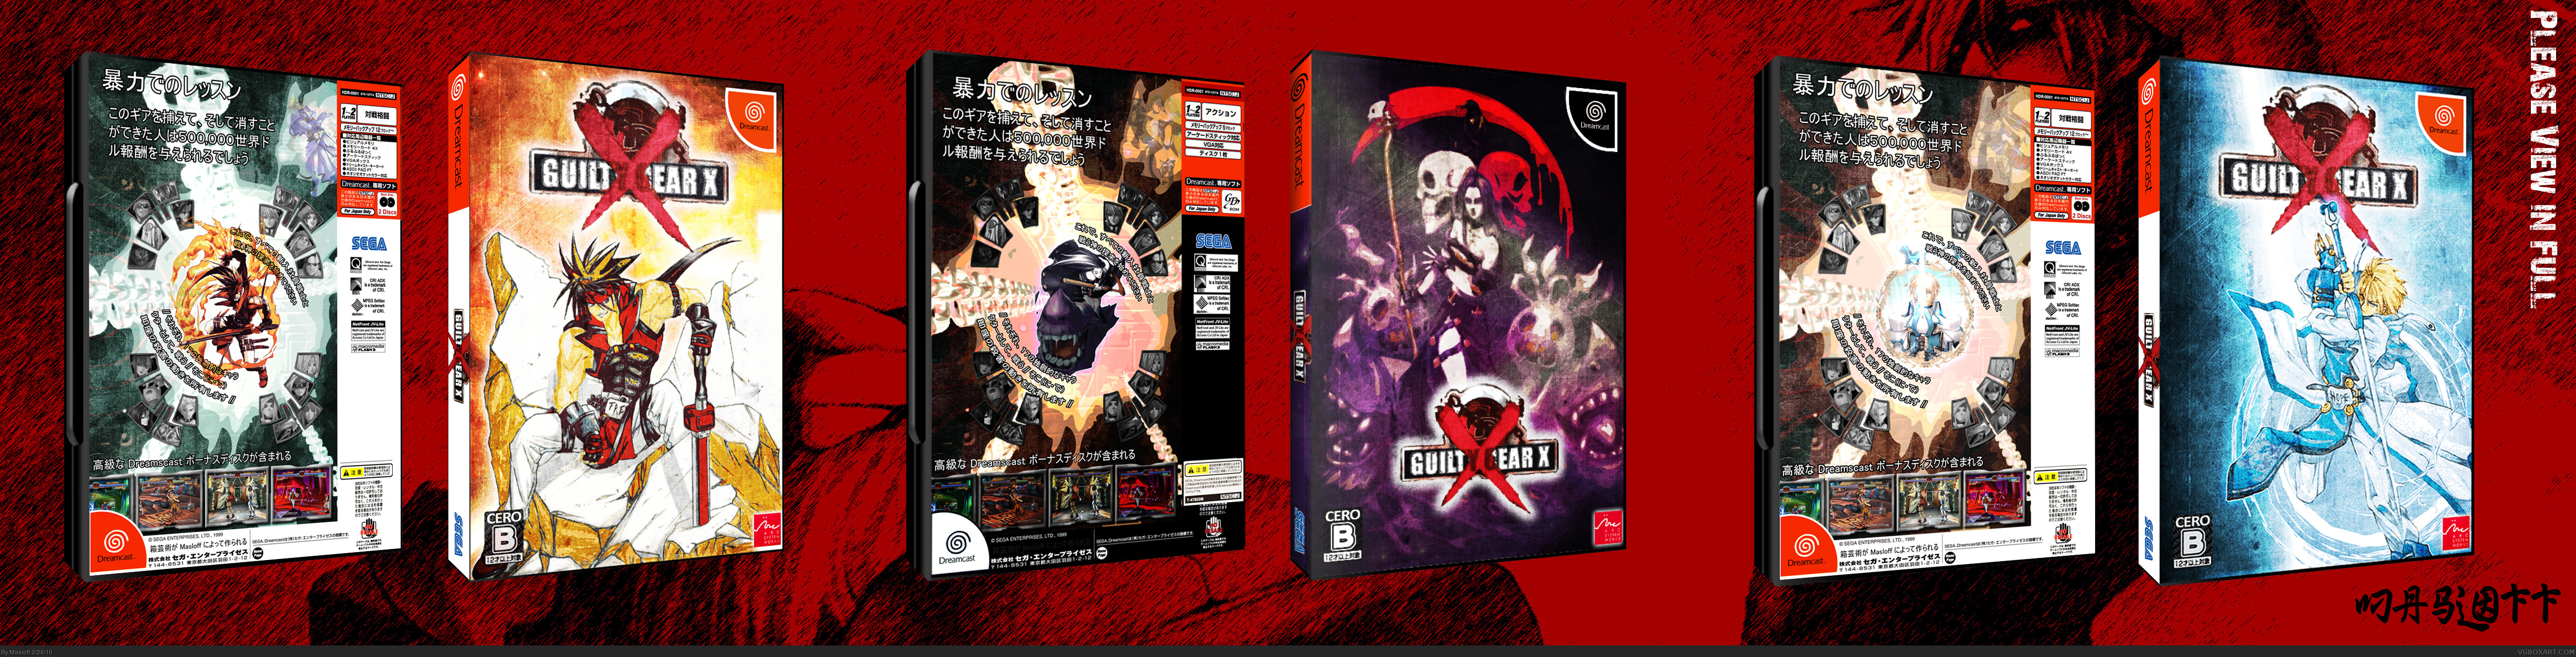 Guilty Gear X box cover